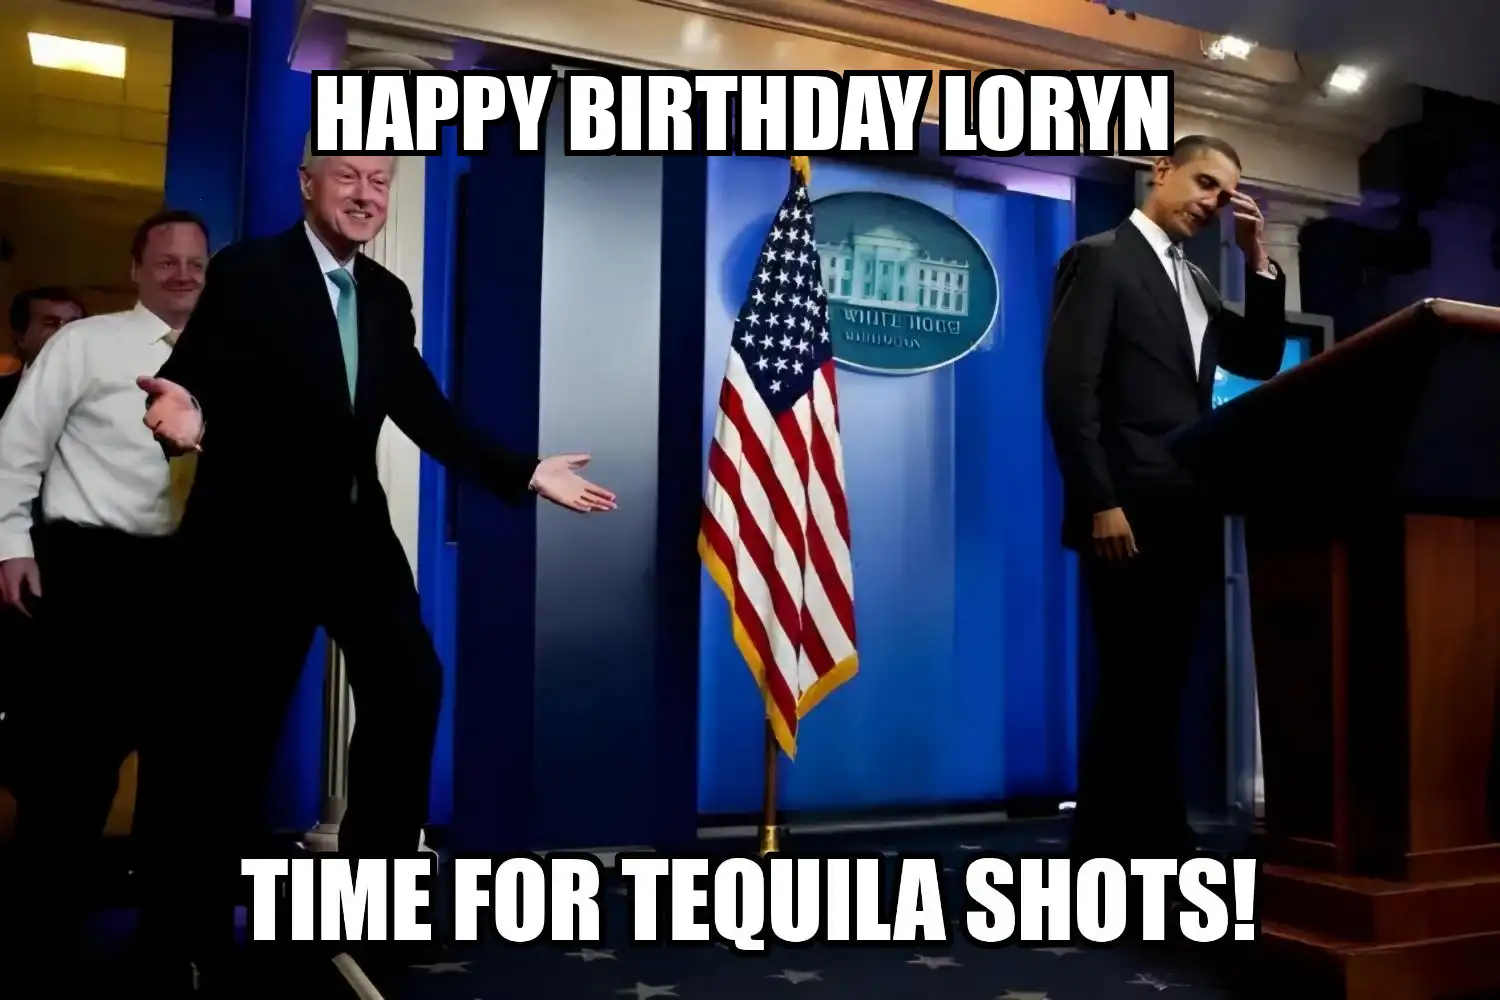 Happy Birthday Loryn Time For Tequila Shots Memes